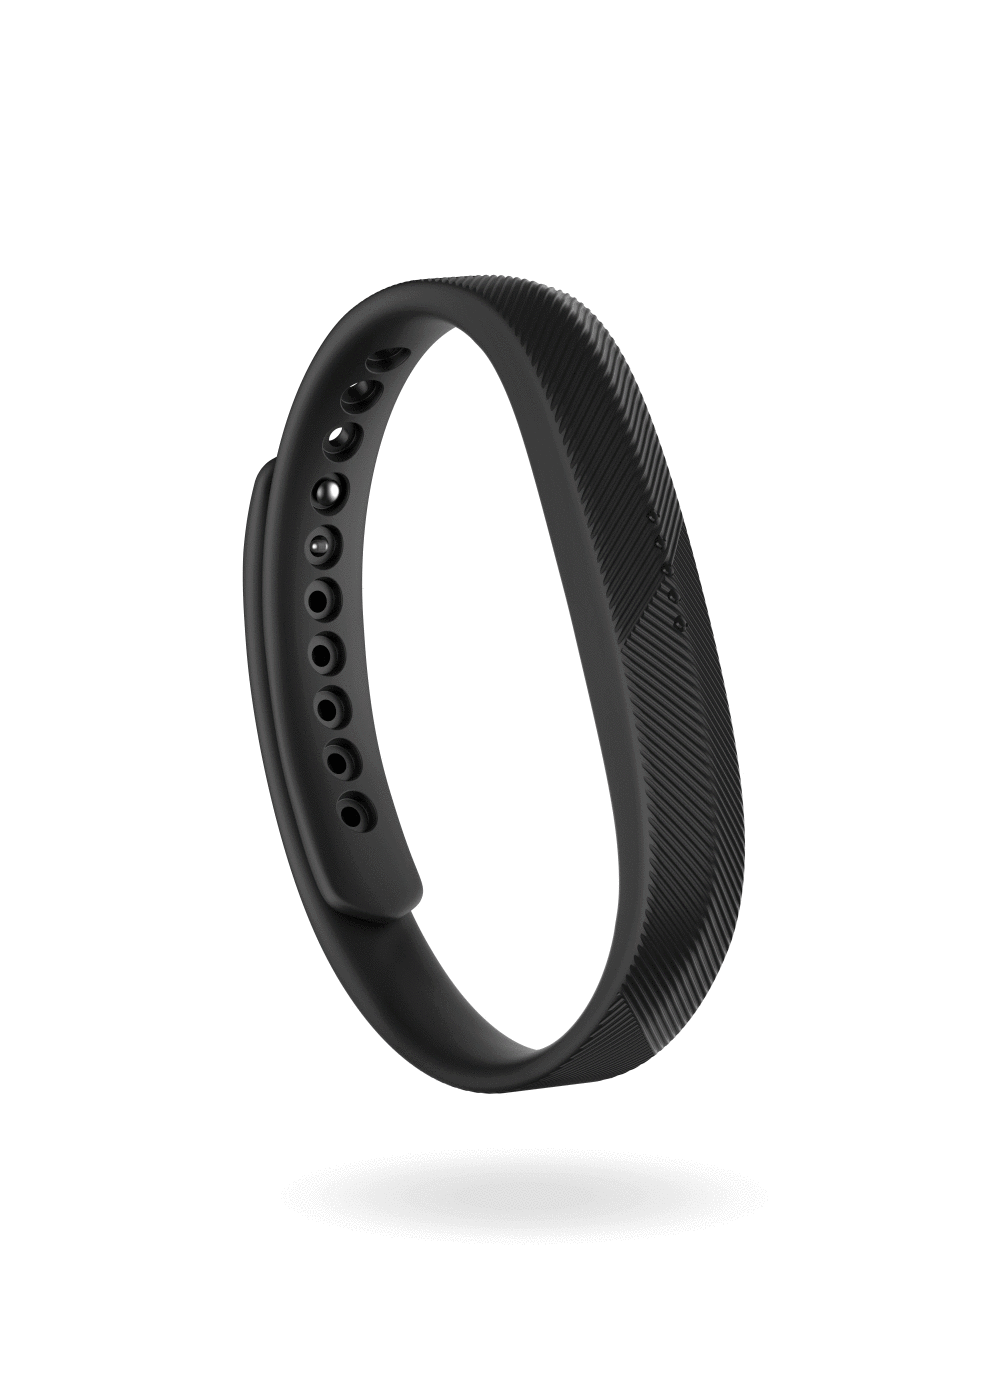 Fitbit Flex 2 reminders to move goal celebration notification